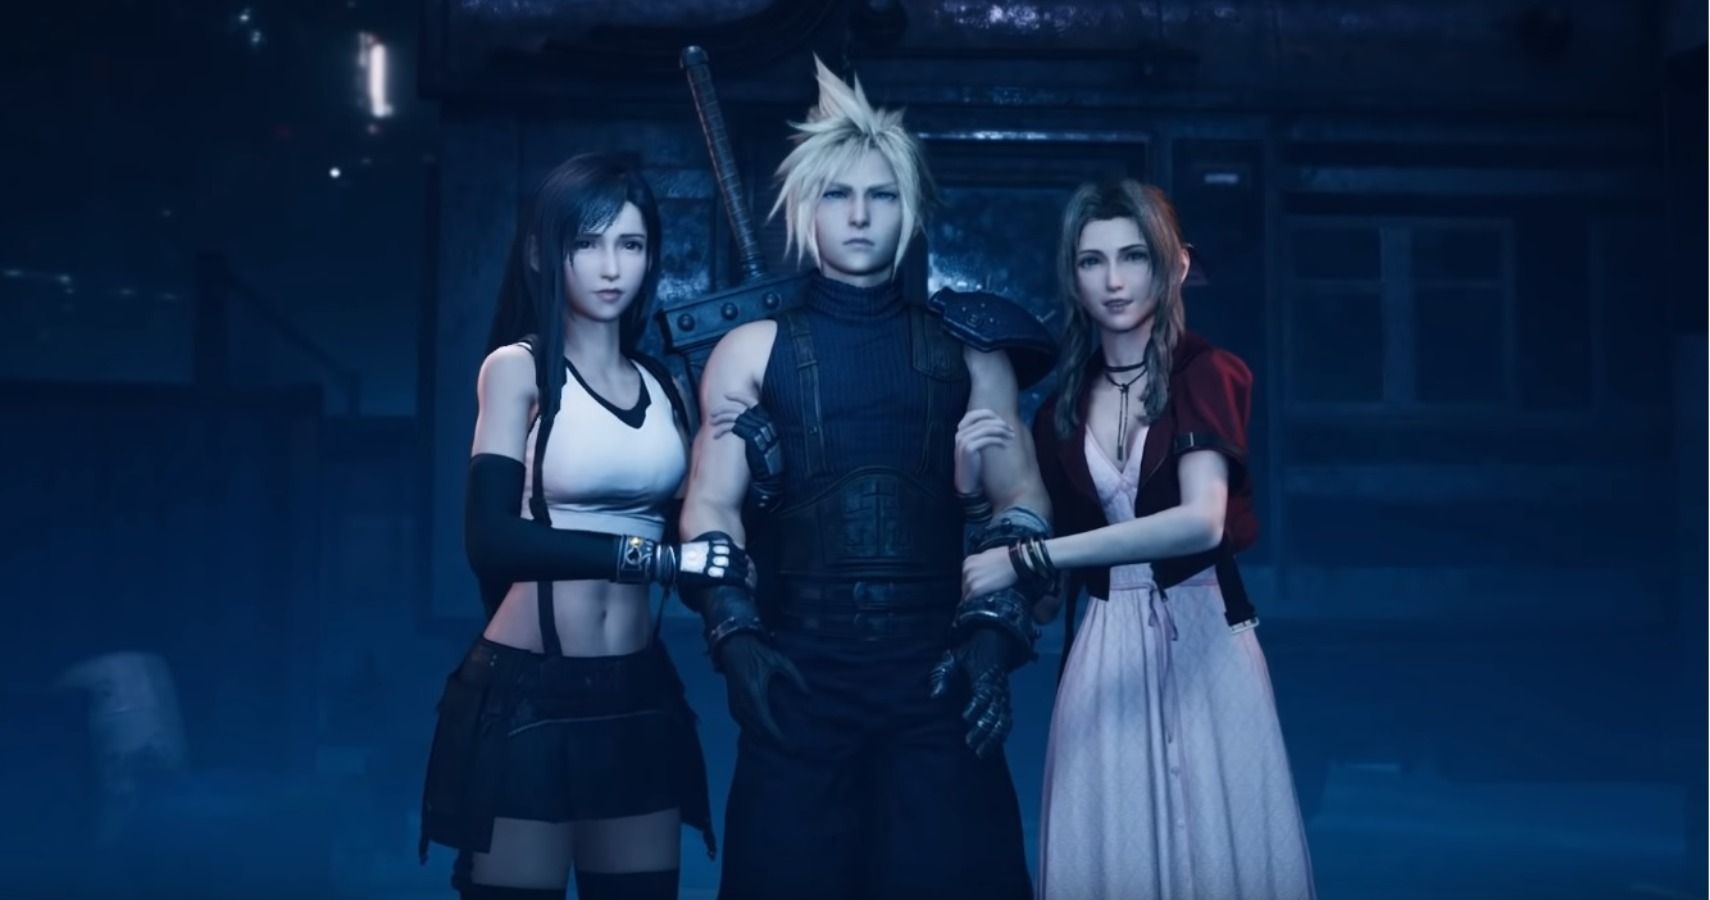 Final Fantasy VII Remake’s Voice Talent Didn’t Have Time To Prepare Their Lines